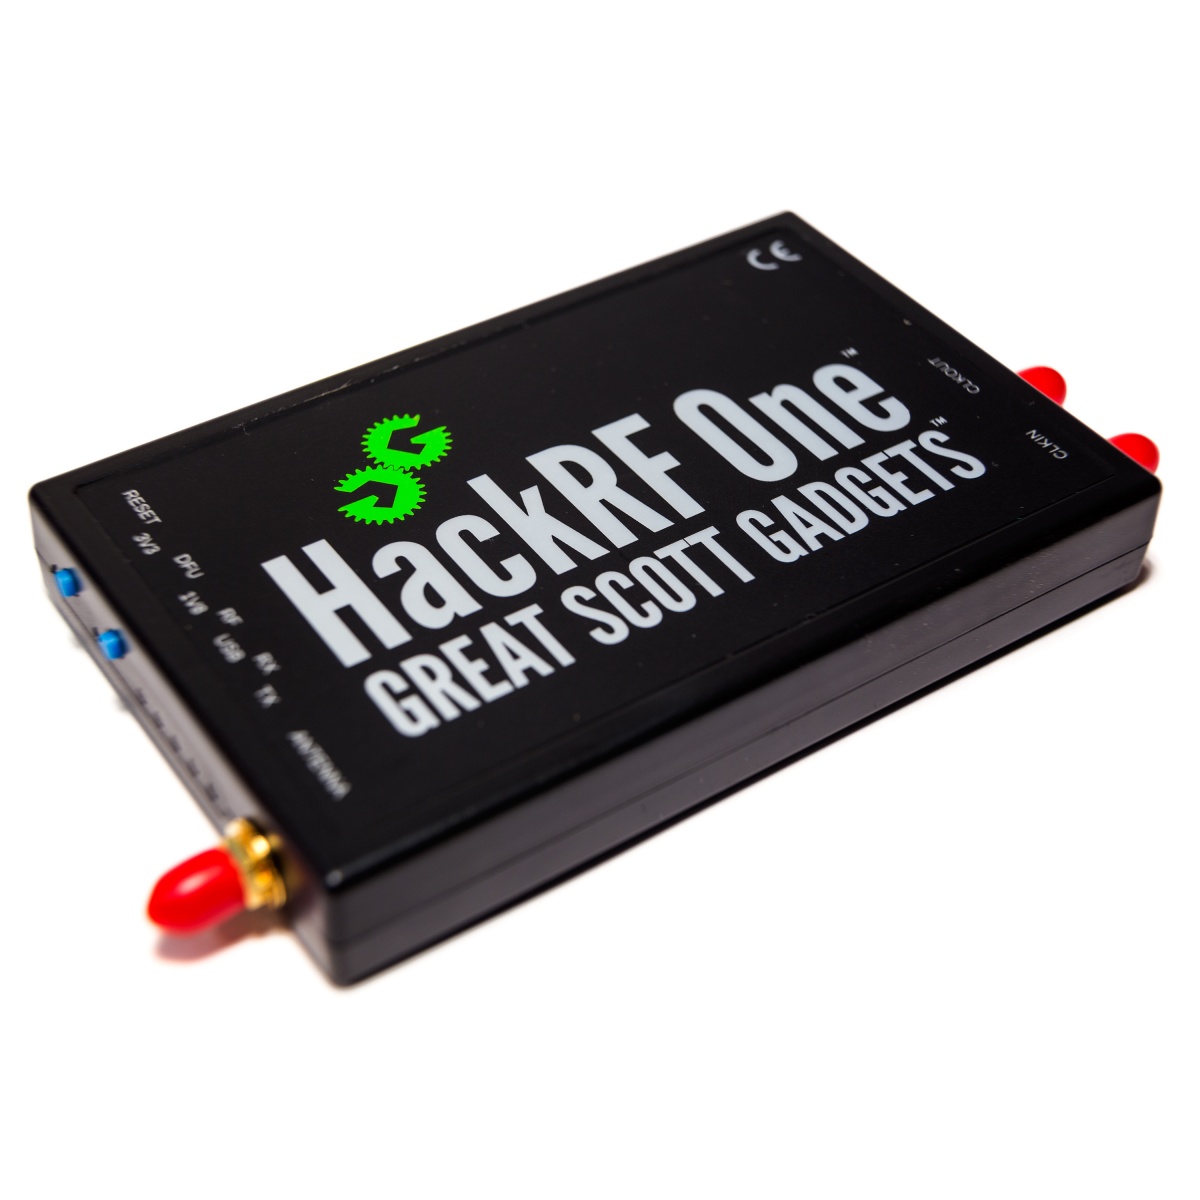 SDR4Everyone: Review of the HackRF